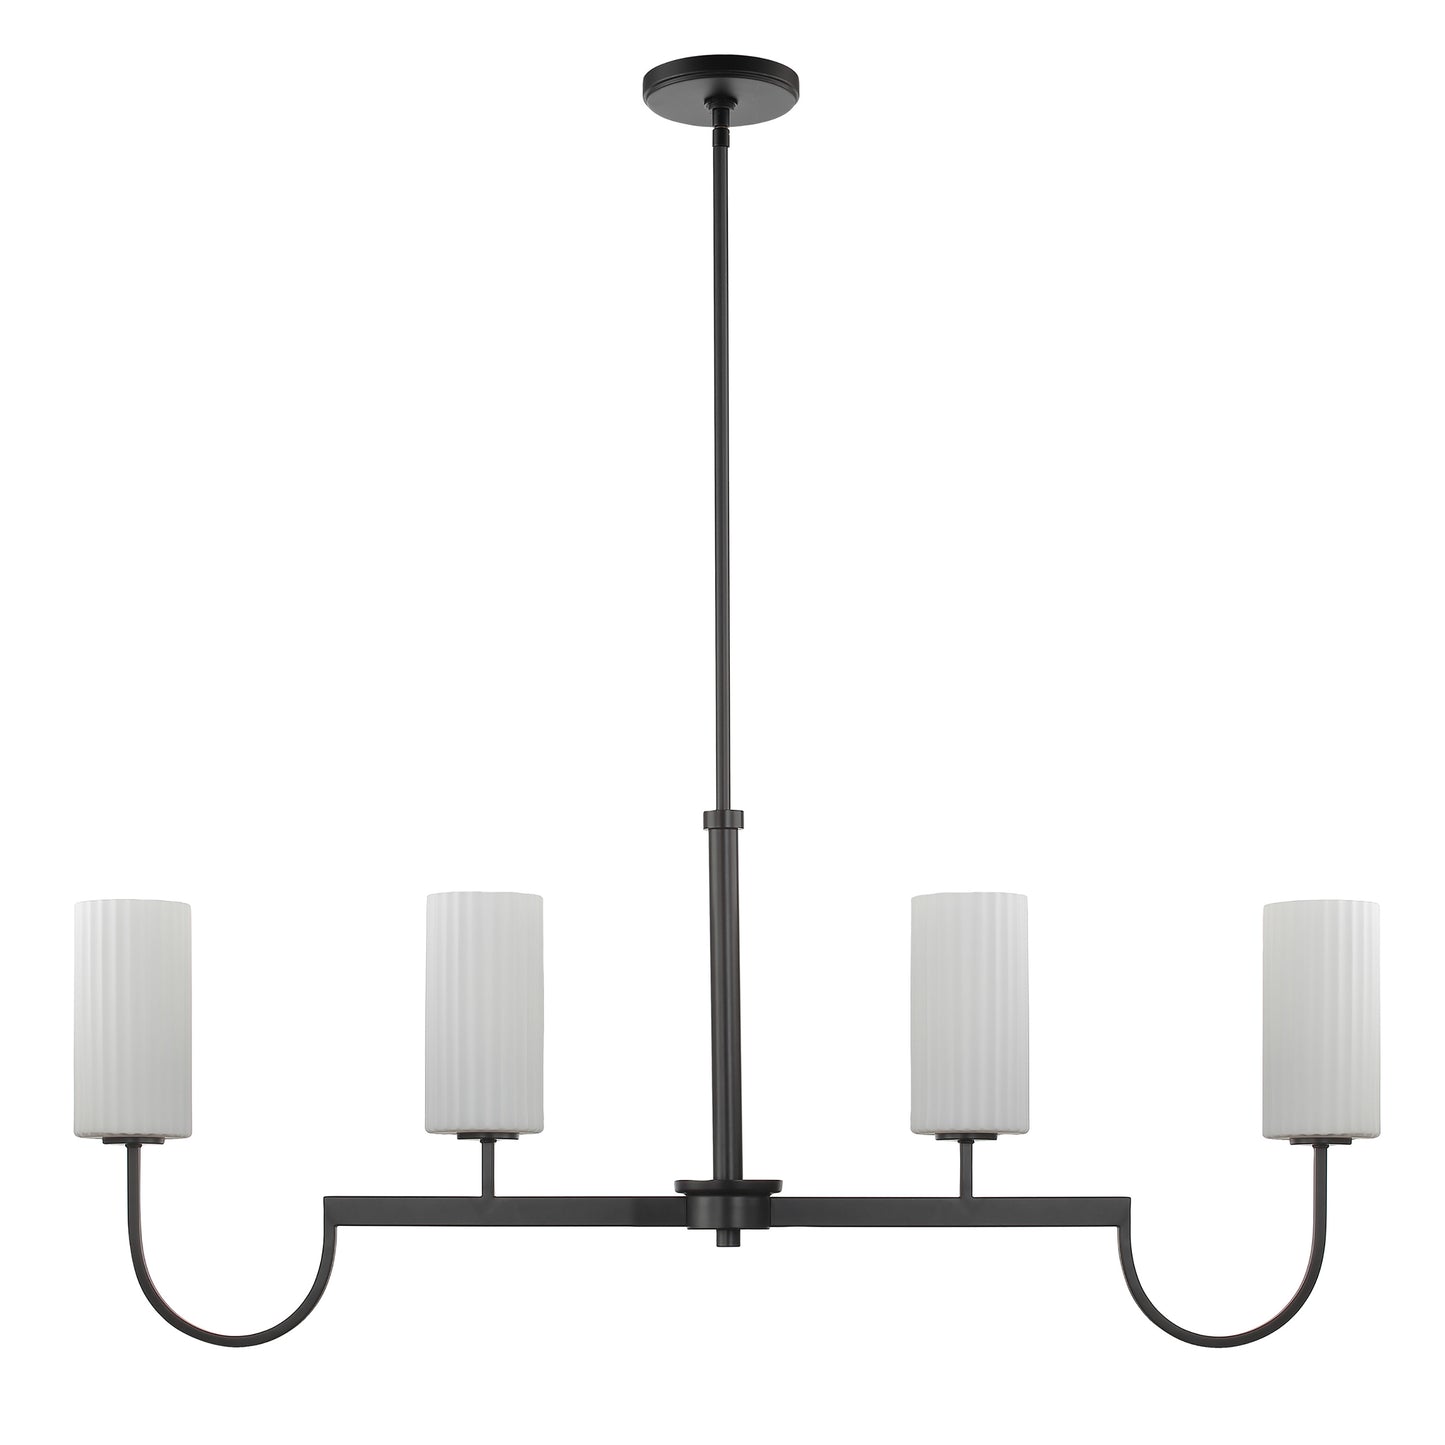 32004SWBK - 4 Light Town and Country 43" Chandelier - Black